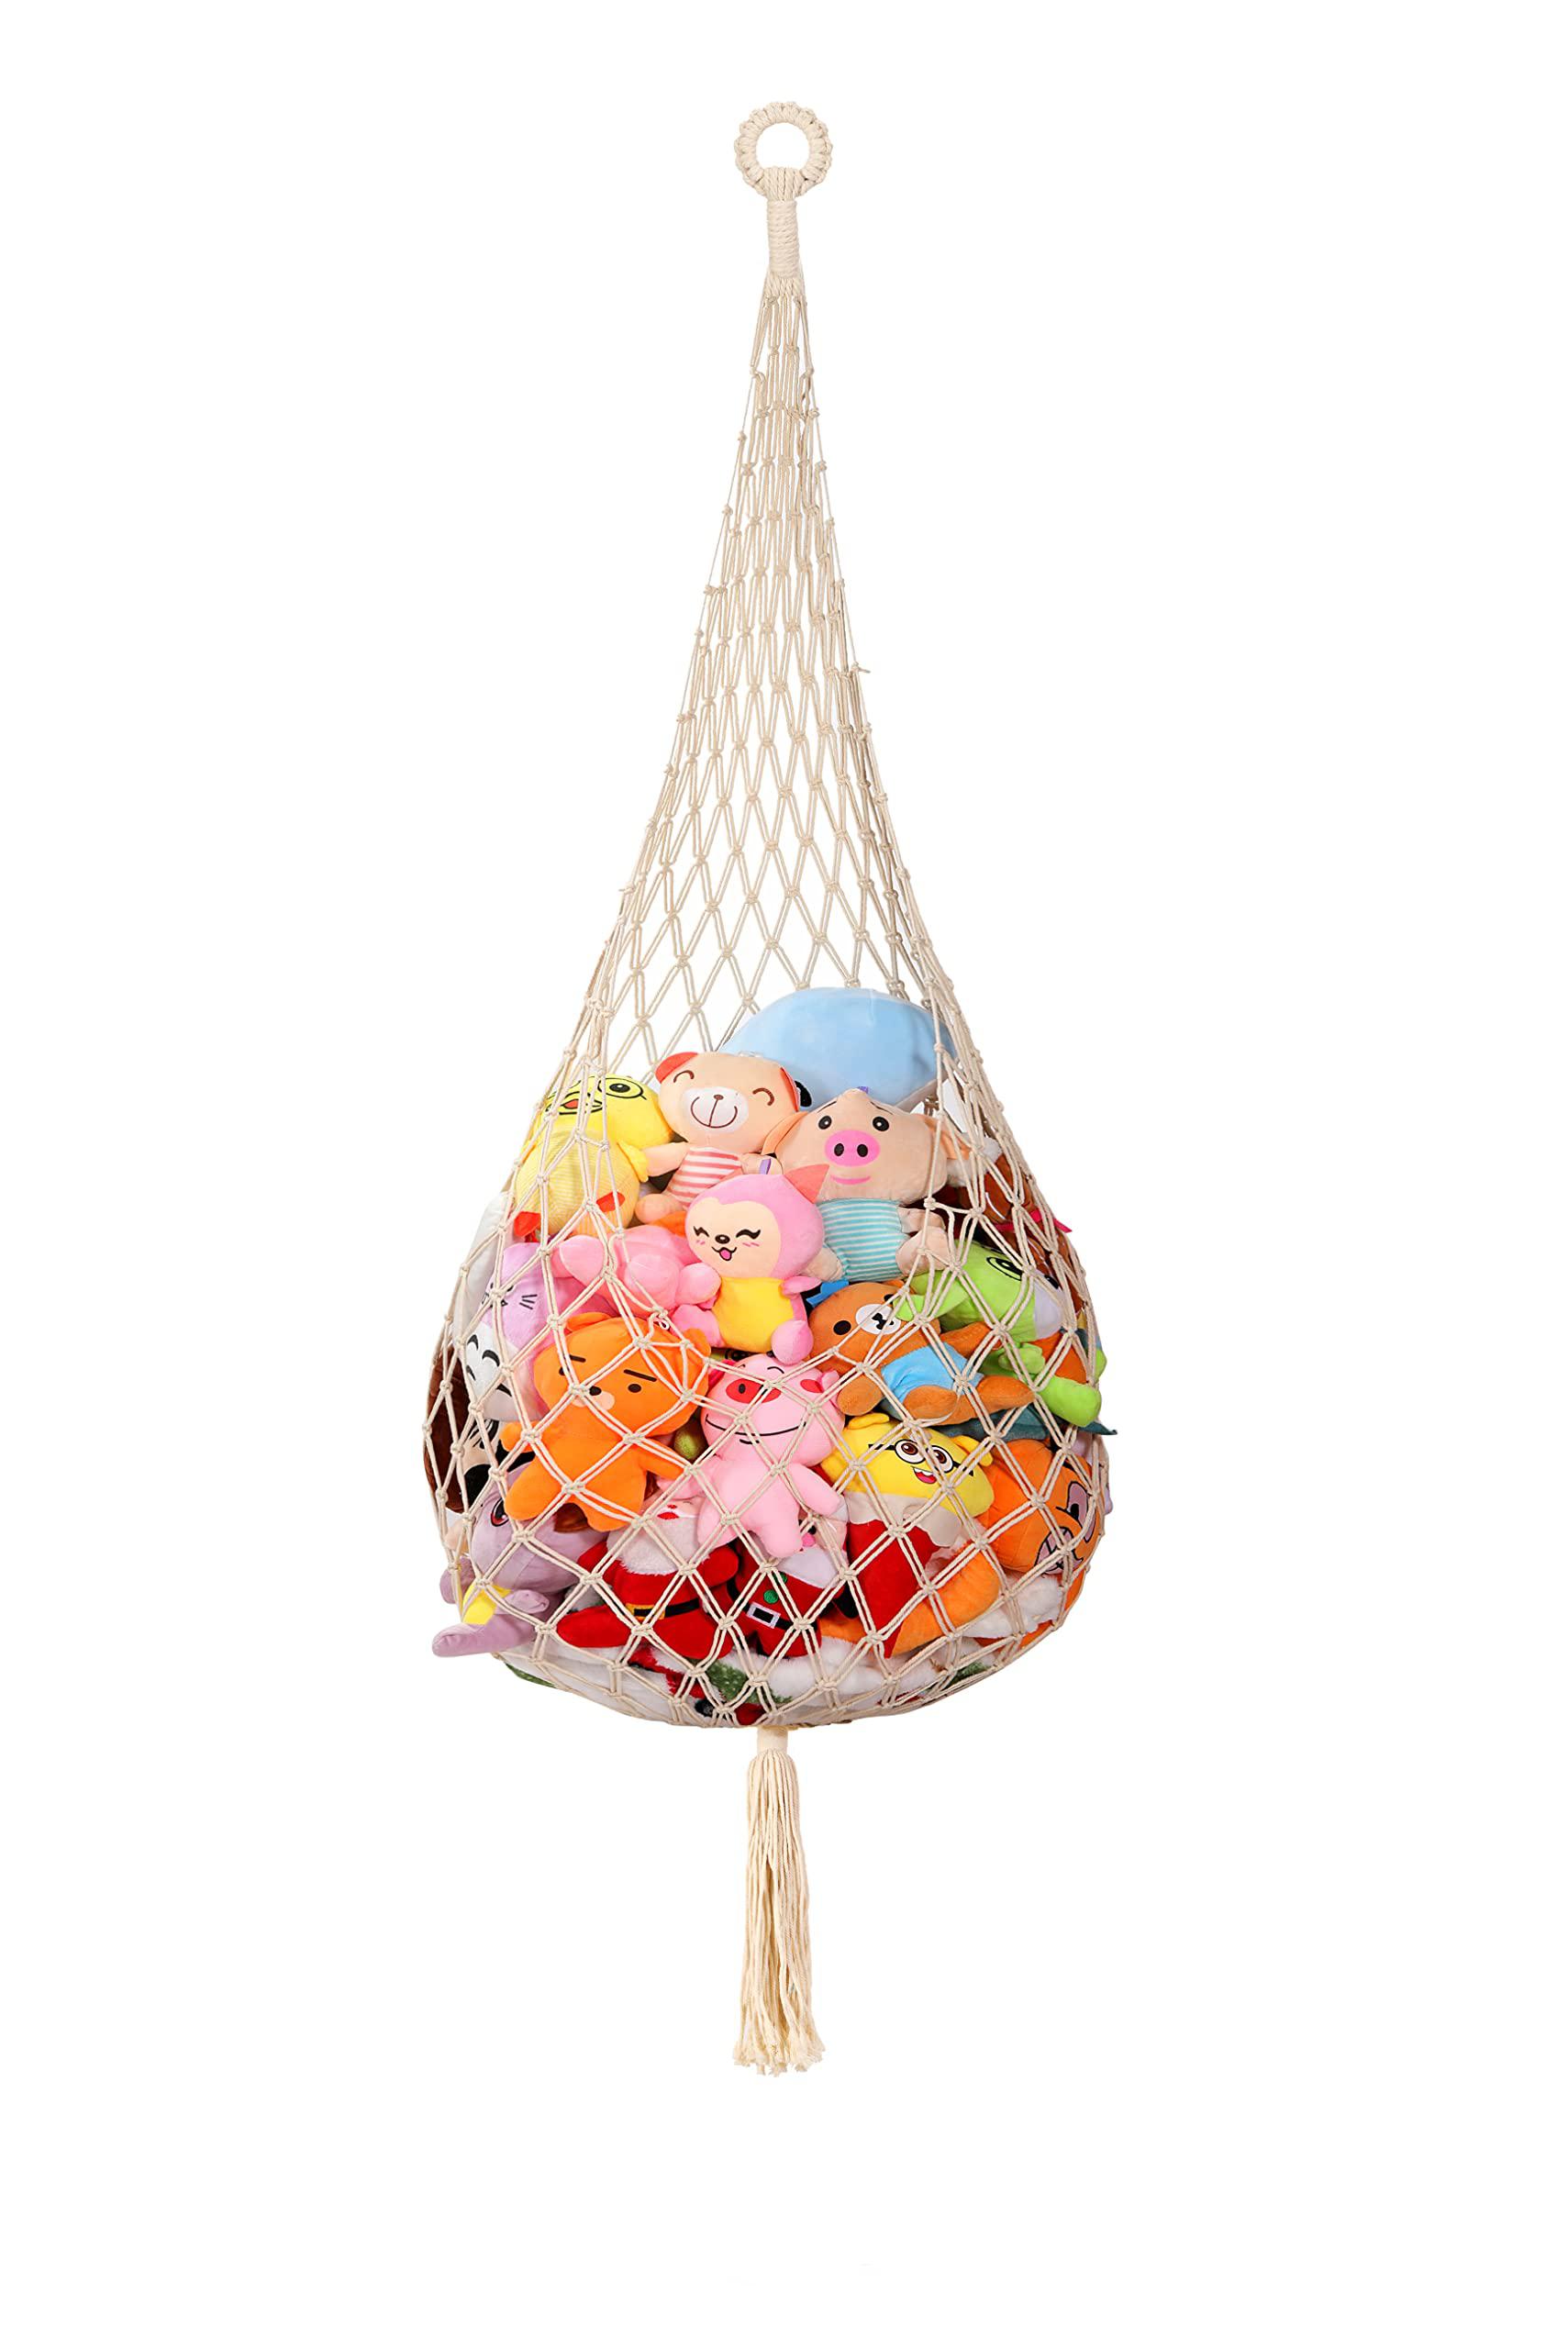 ORALSO oralso stuffed animal storage net or hammock, single hook display  large plush toy! ceiling hanging stuff animal hanger with s